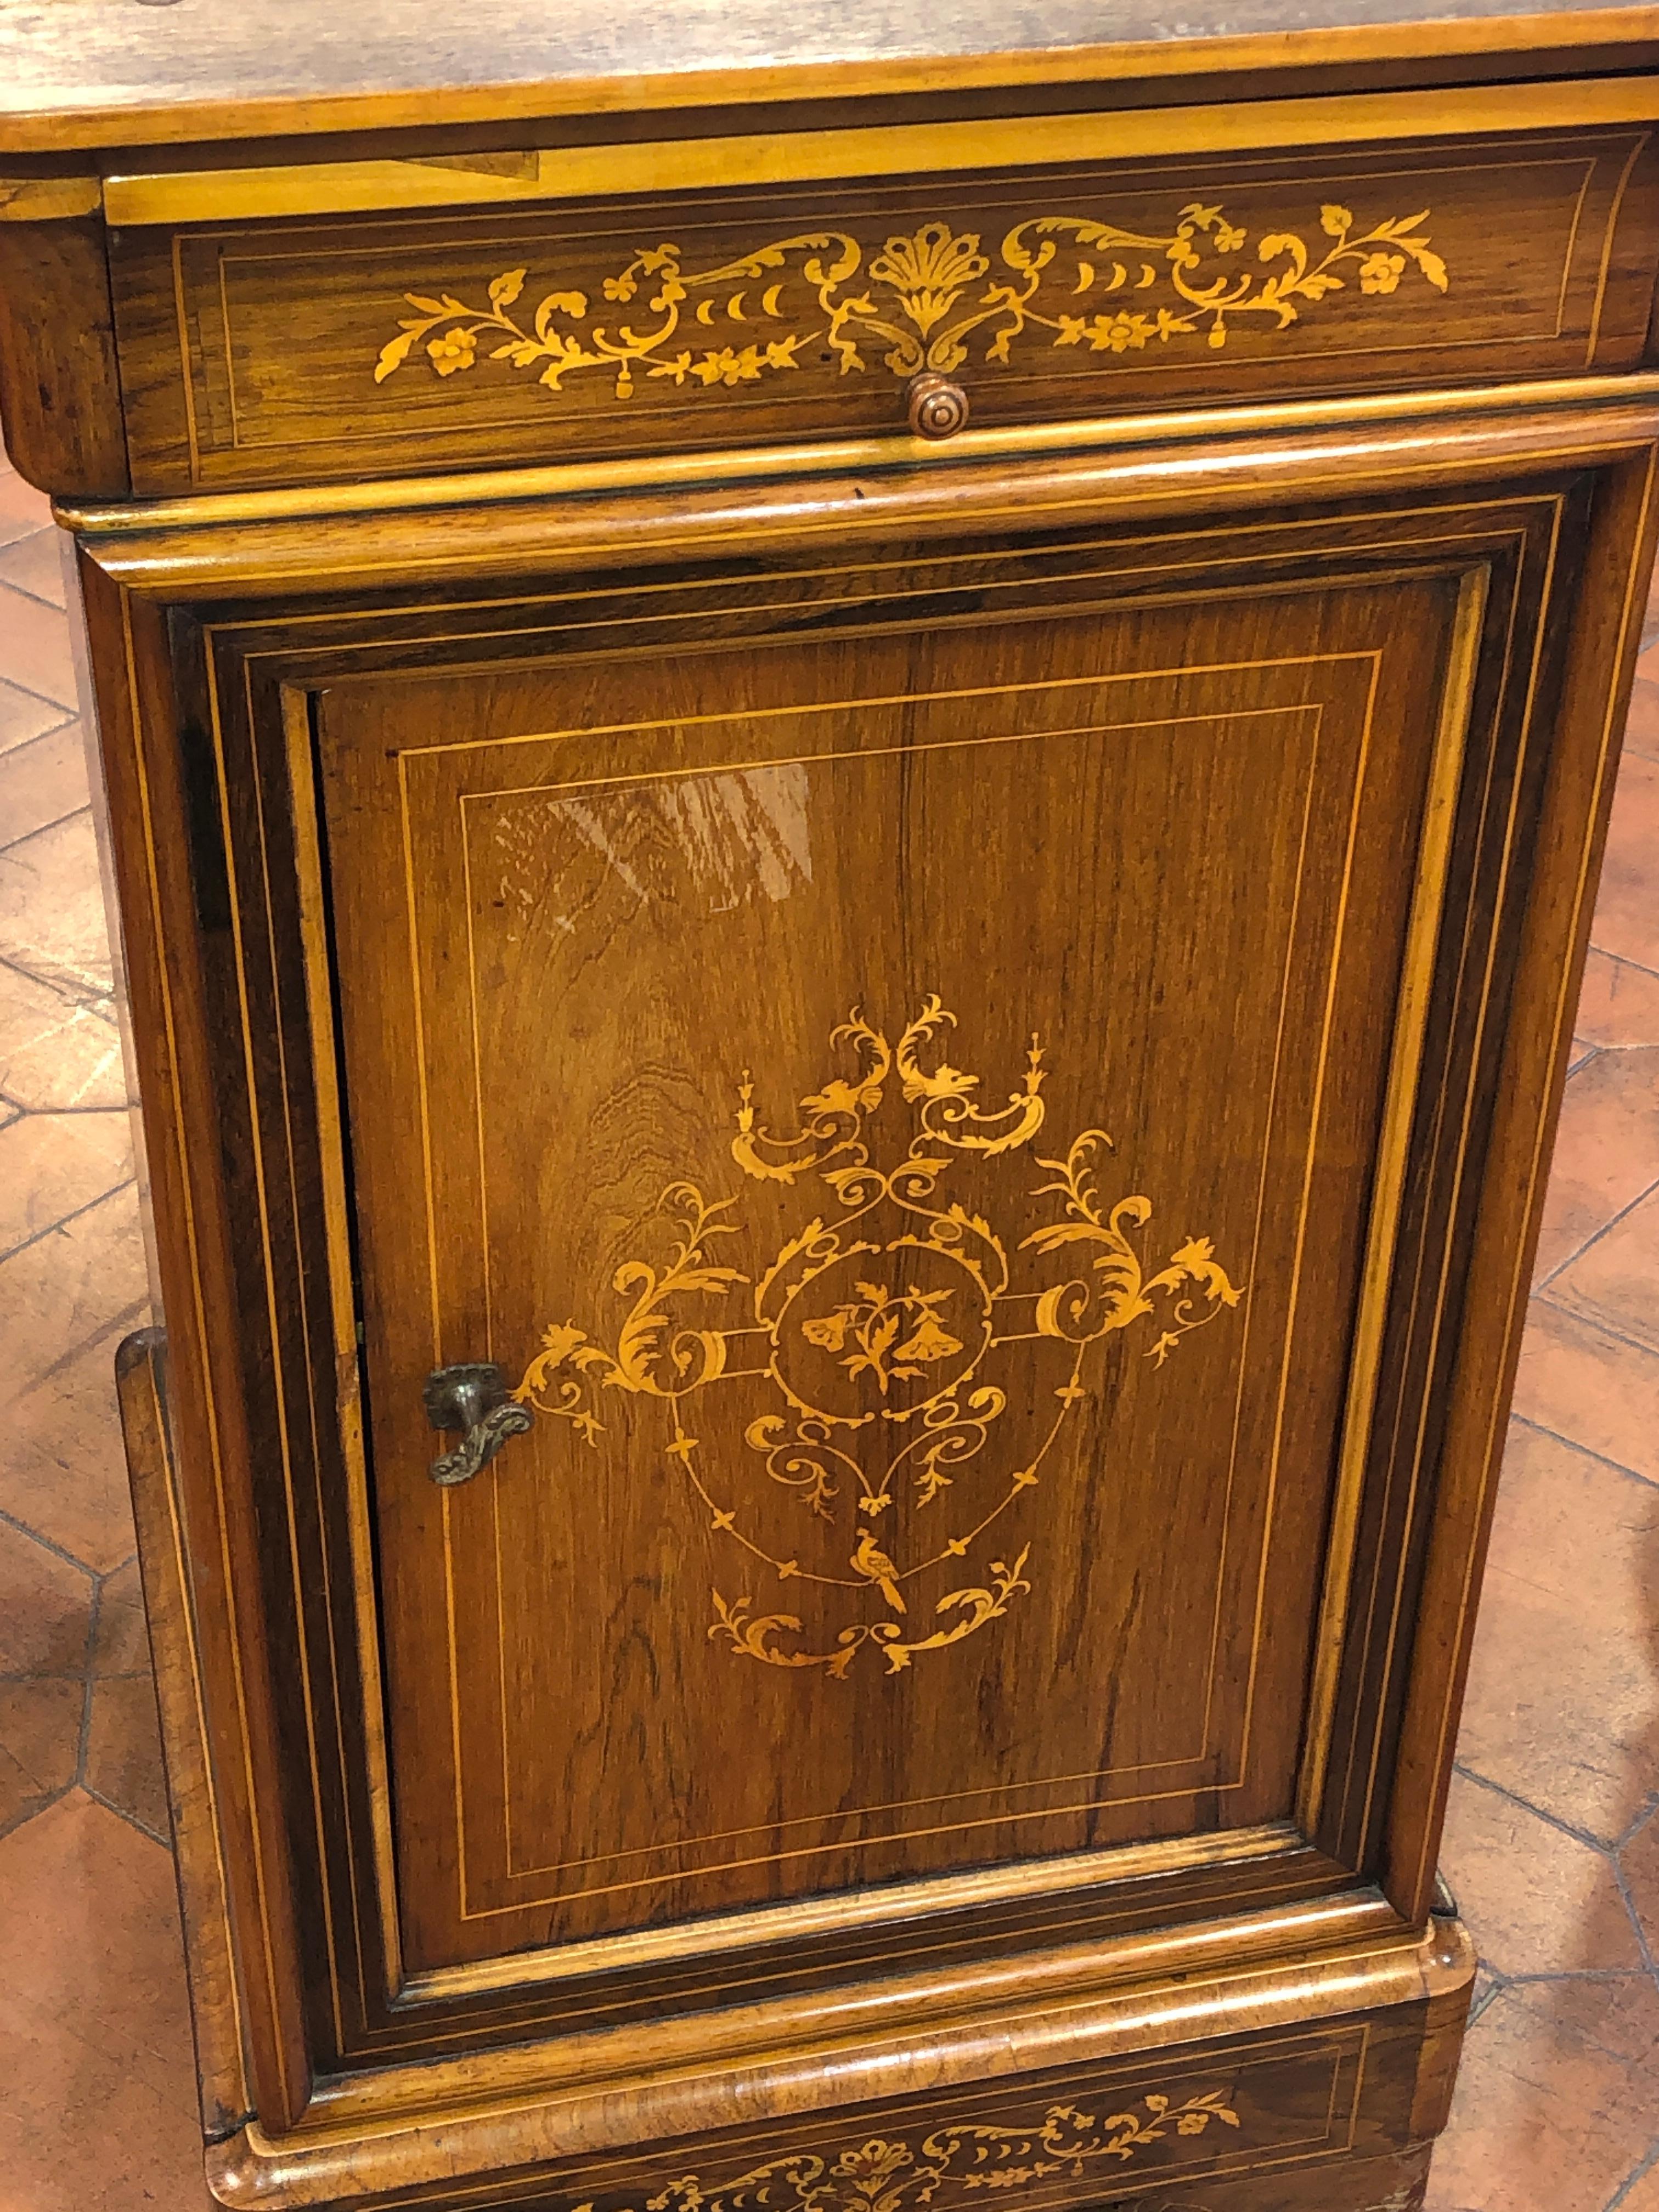 Fantastic French centerpiece, period Charles X, circa 1830, in rosewood and inlaid with boxwood.
Exceptional work with geometric and floral shapes. One door and two drawers, one of which is hidden in the lower part of the plinth. Original marble top